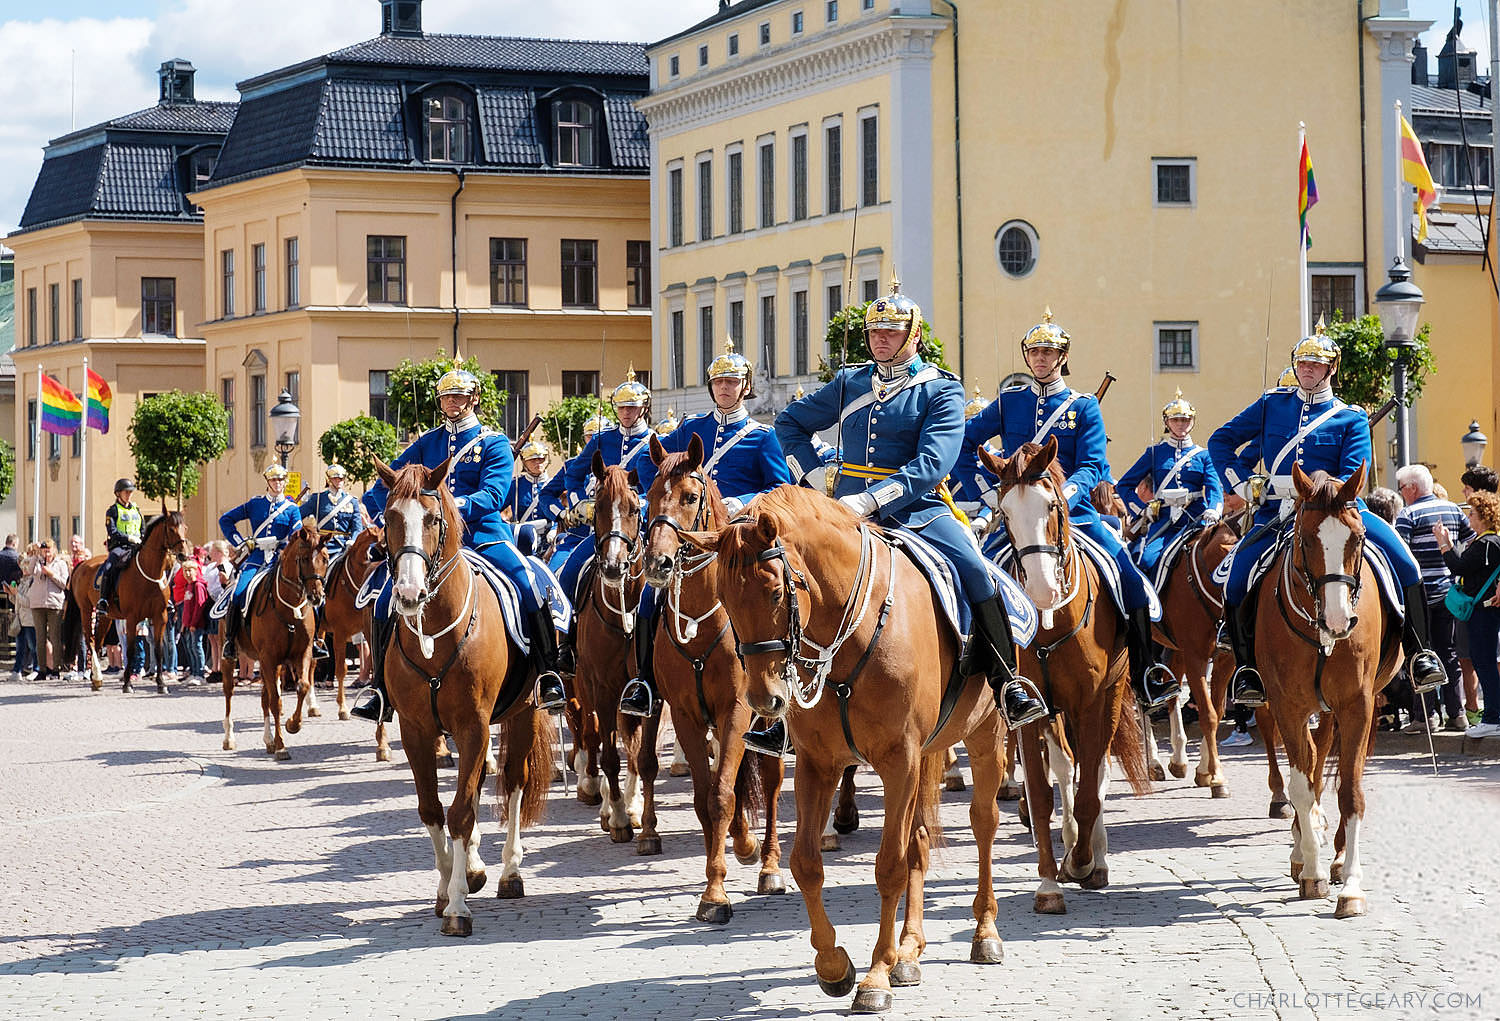 The changing of the Swedish Royal Guard outside the Palace